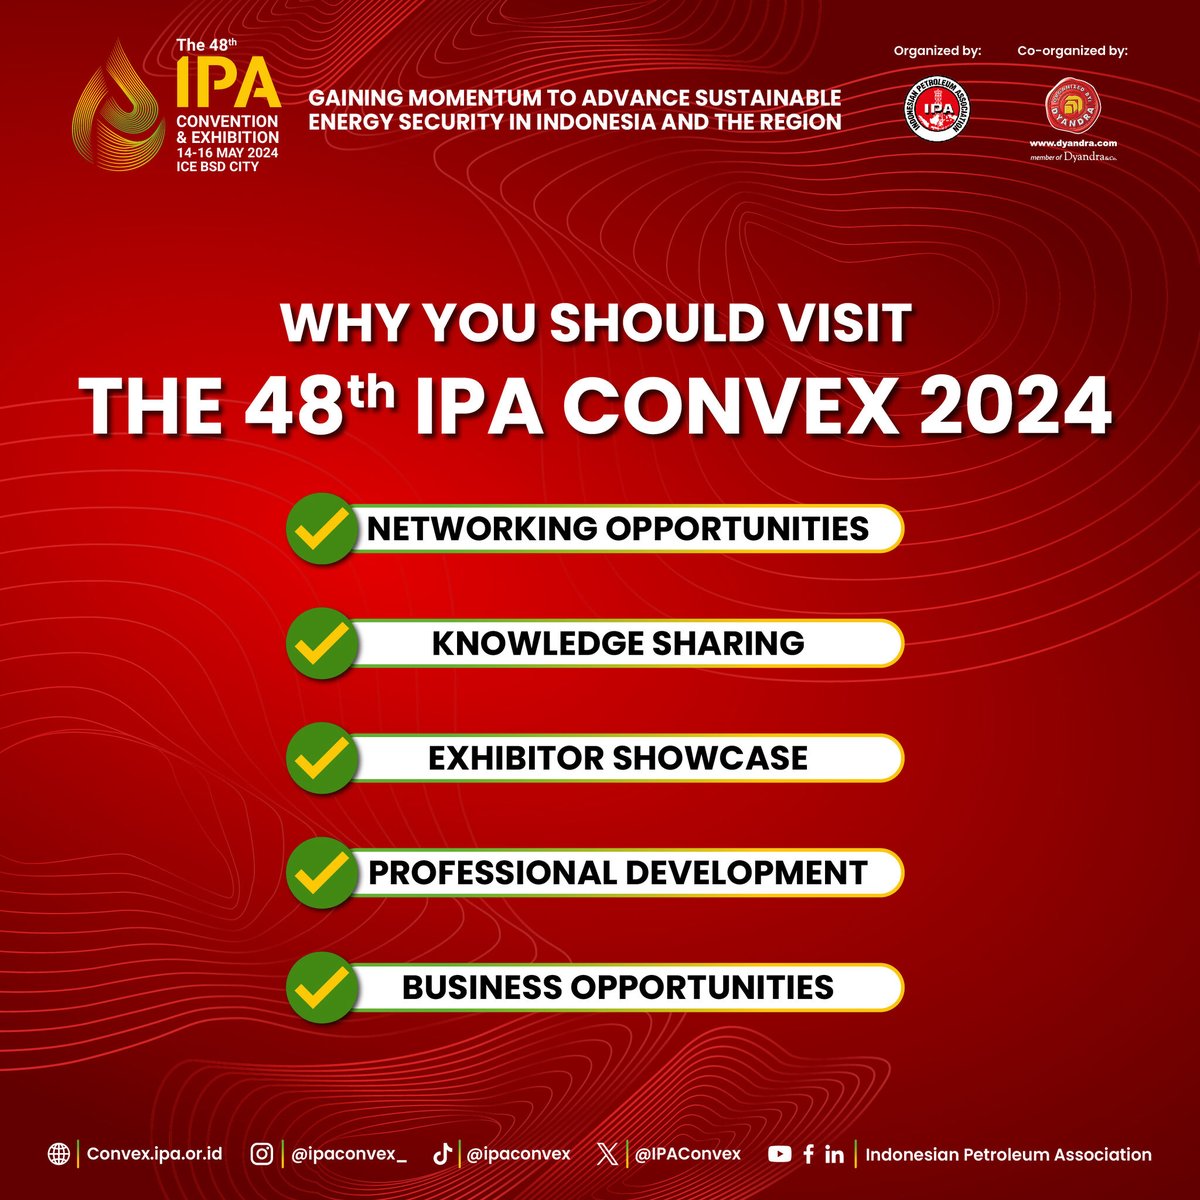 Embark on a journey of innovation at IPA Convex 2024! 

Here’s why you shouldn’t miss it: Networking opportunities, regional markets and trends, business opportunities, and more.

Seize this moment to shape the future of your business!

#SponsoredContent #IPAConvex2024 #Migas